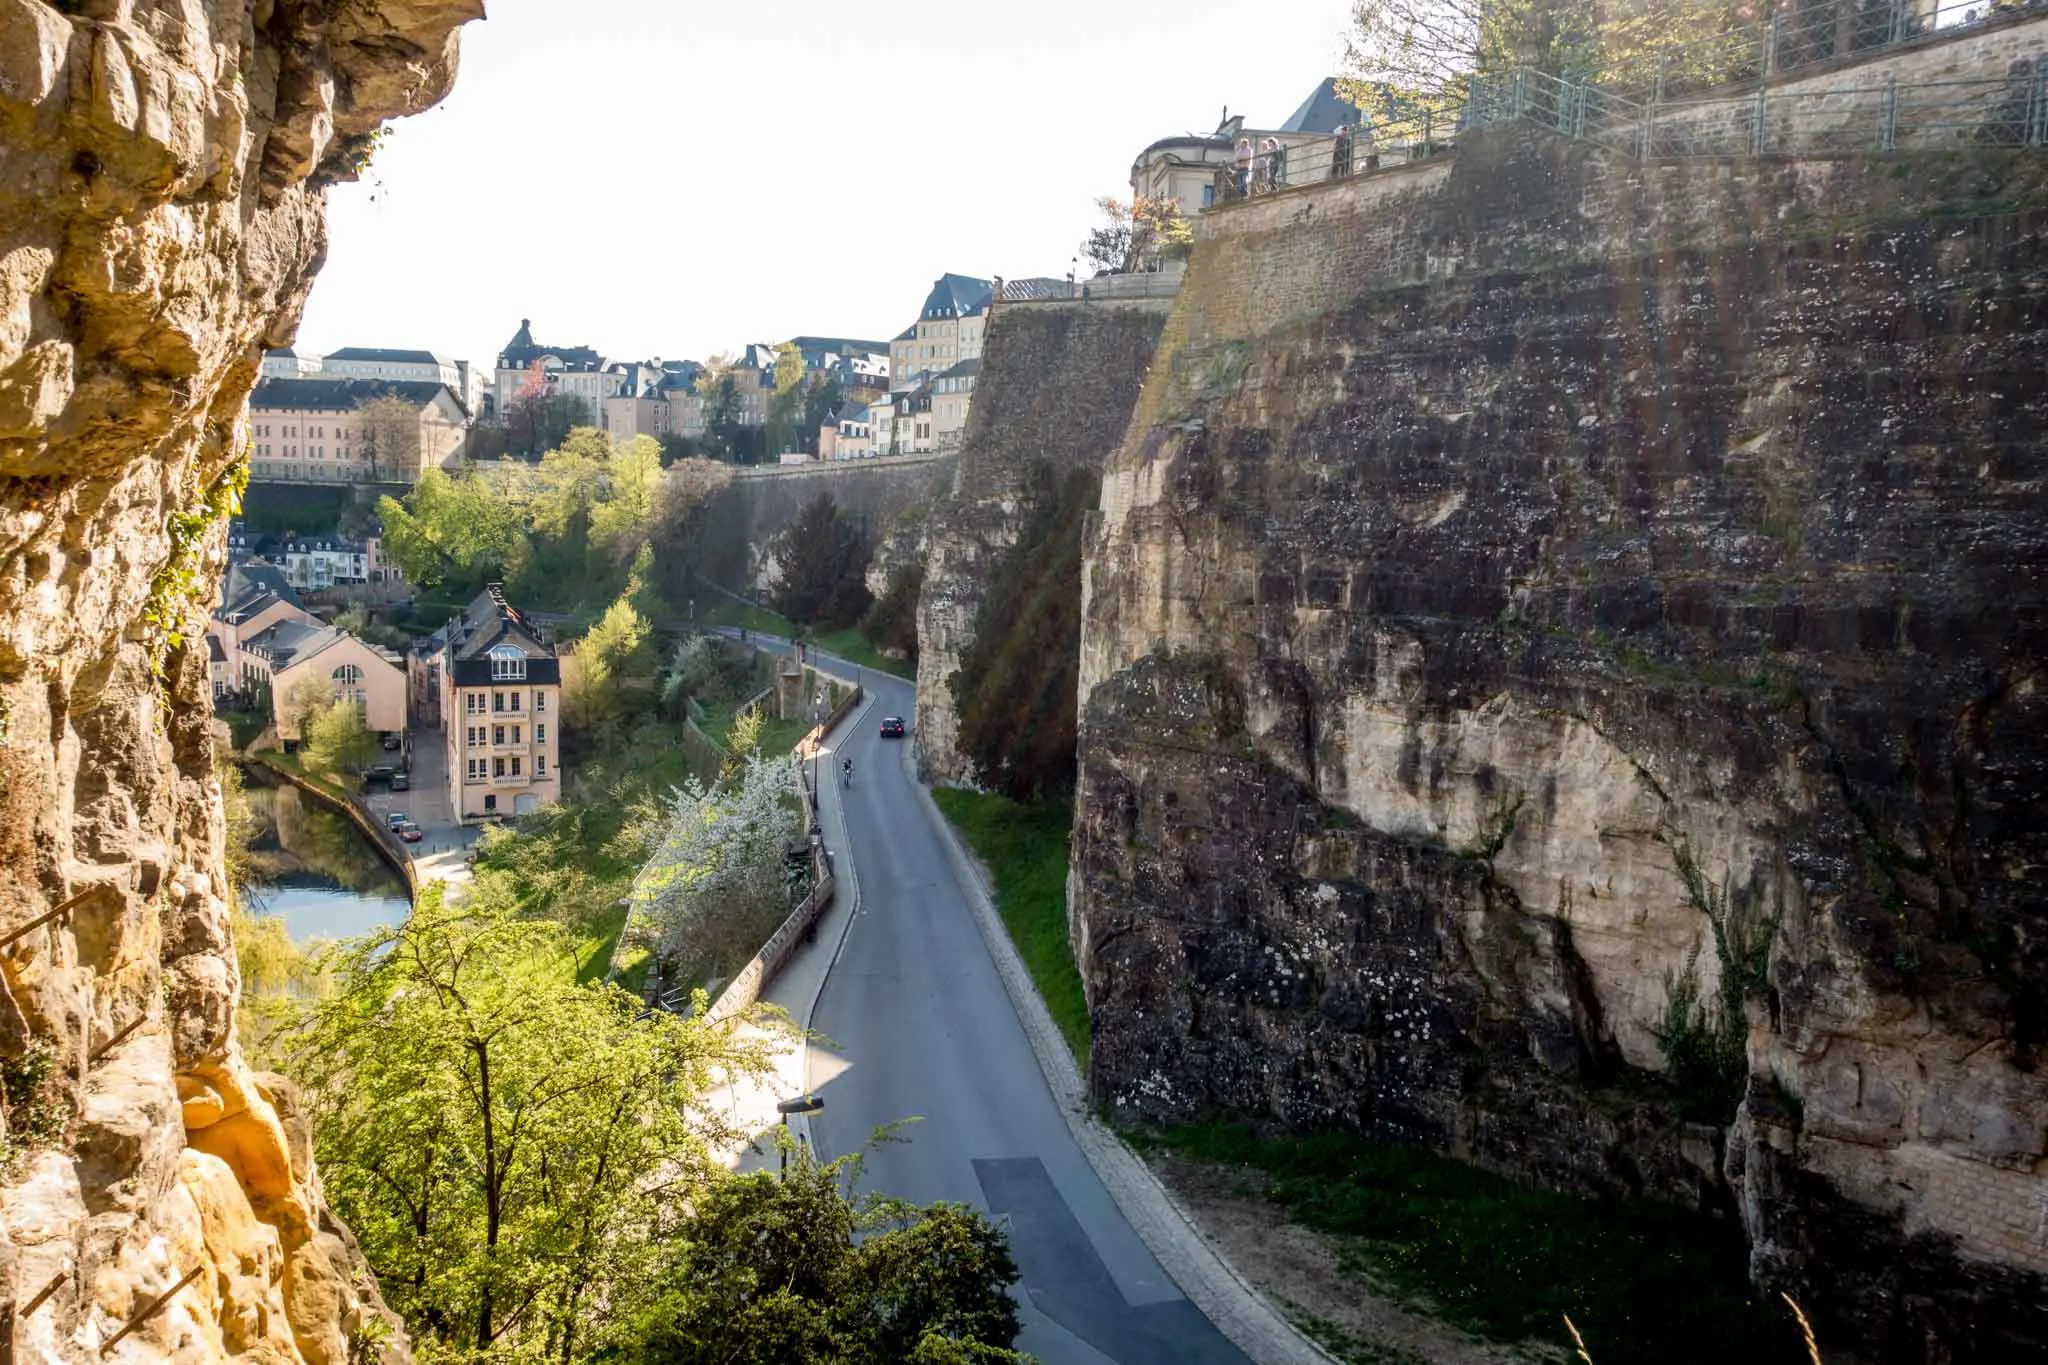 View of road between upper and lower parts of Luxembourg City